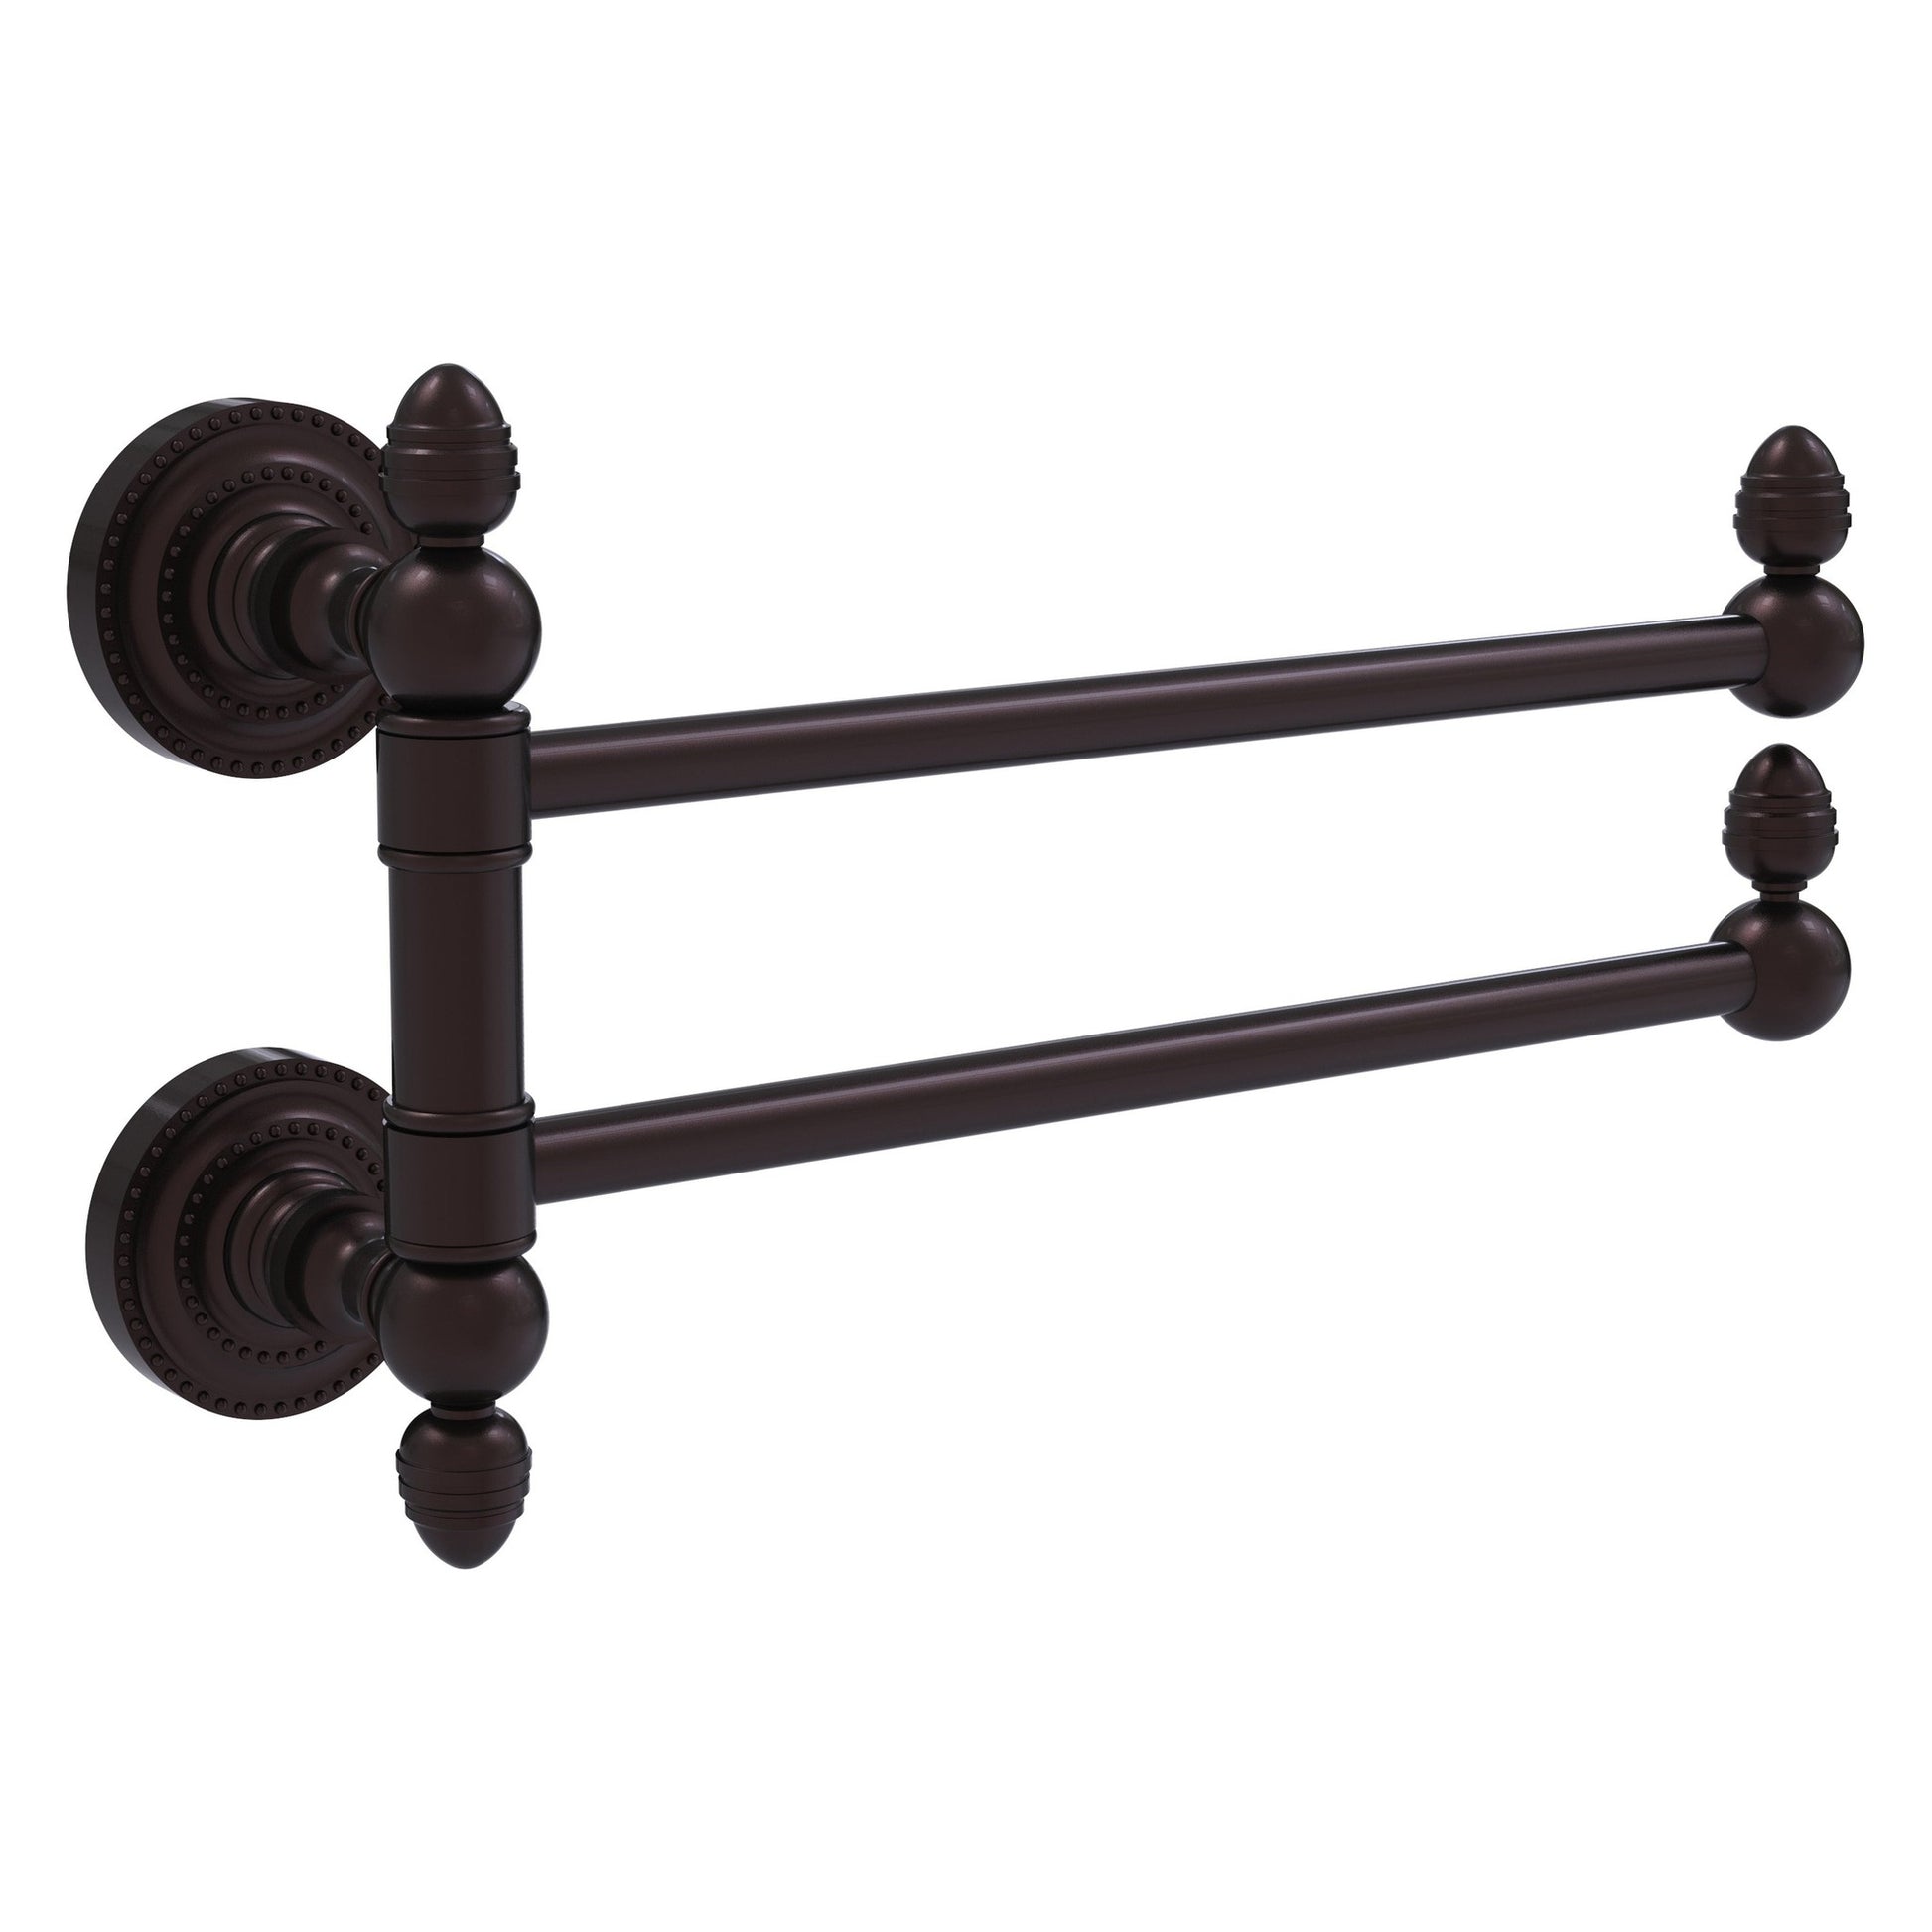 Allied Brass Solid Brass Towel Stand with 4 Pivoting Swing Arms Polished Brass  Brass Finish, Polished 